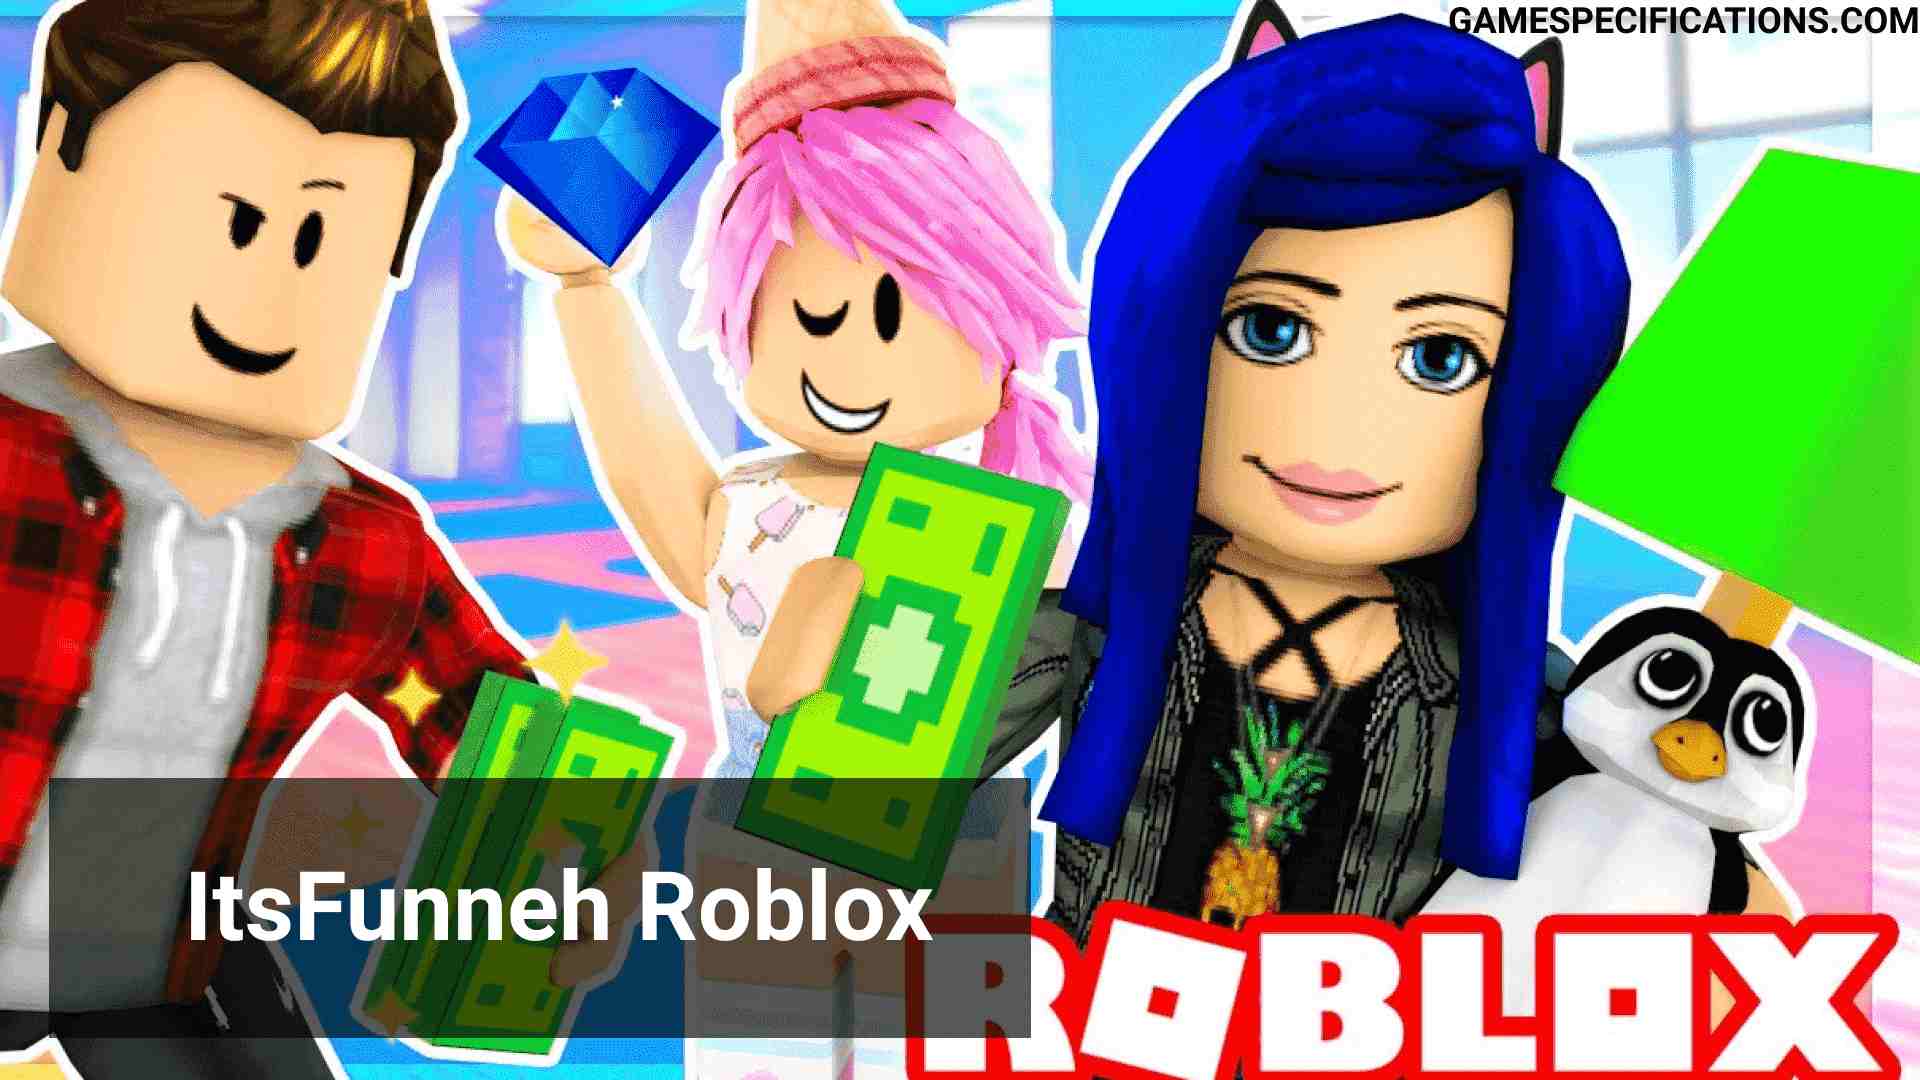 Itsfunneh Roblox Legendary Top Videos Game Specifications - itsfunneh avatar in roblox